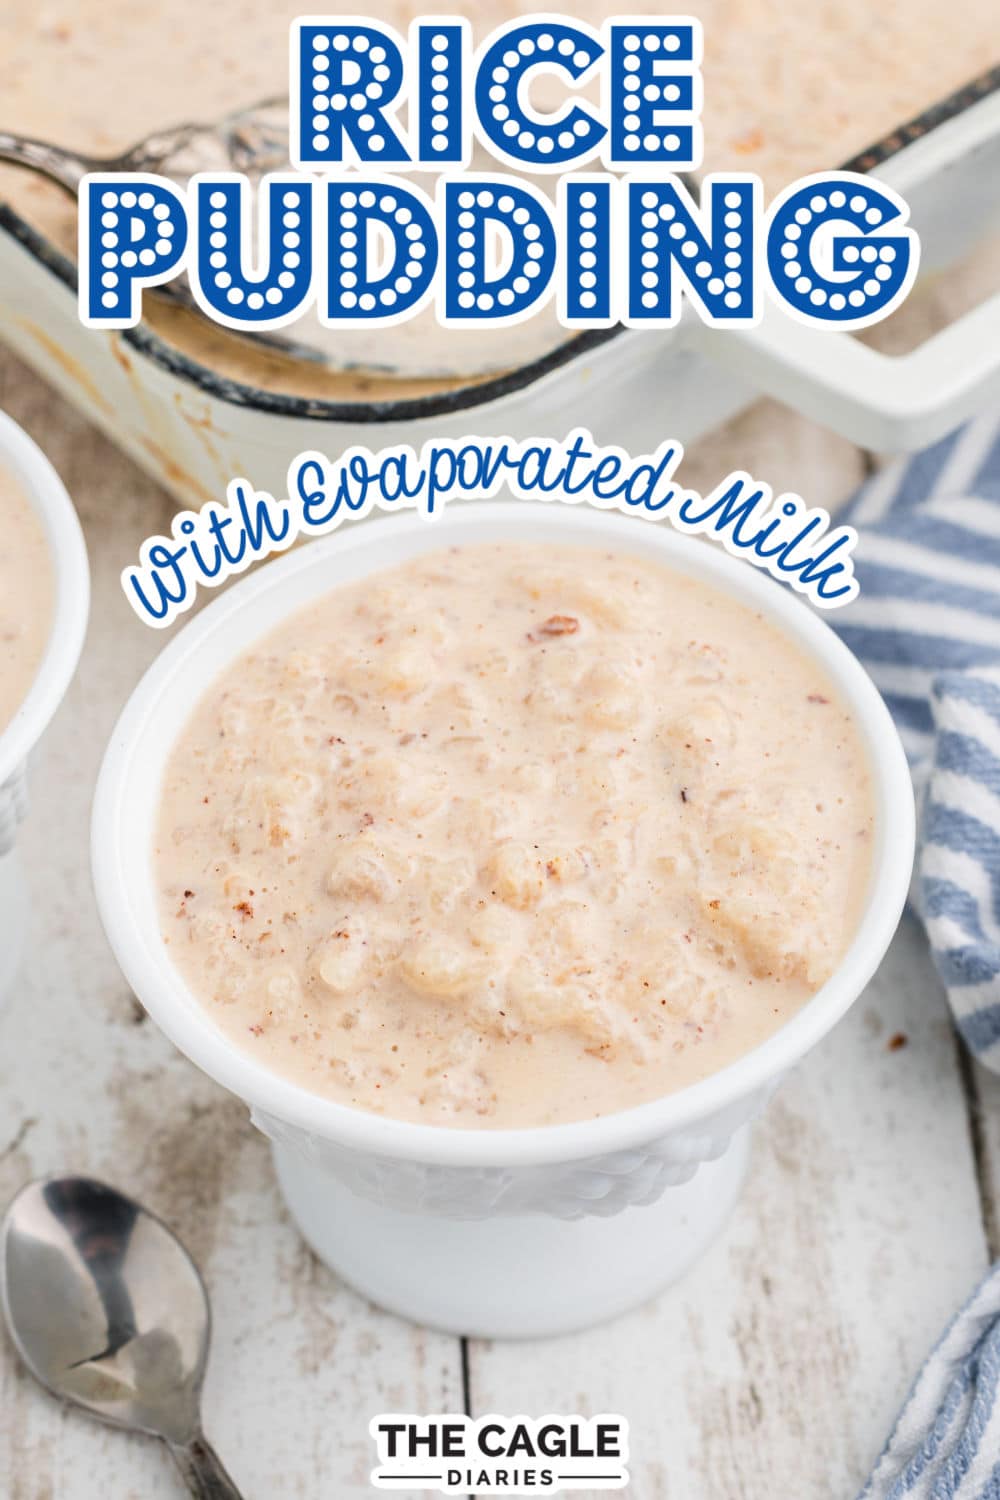 A large image of a bowl of rice pudding with evaporated milk with text overlay for pinterest.